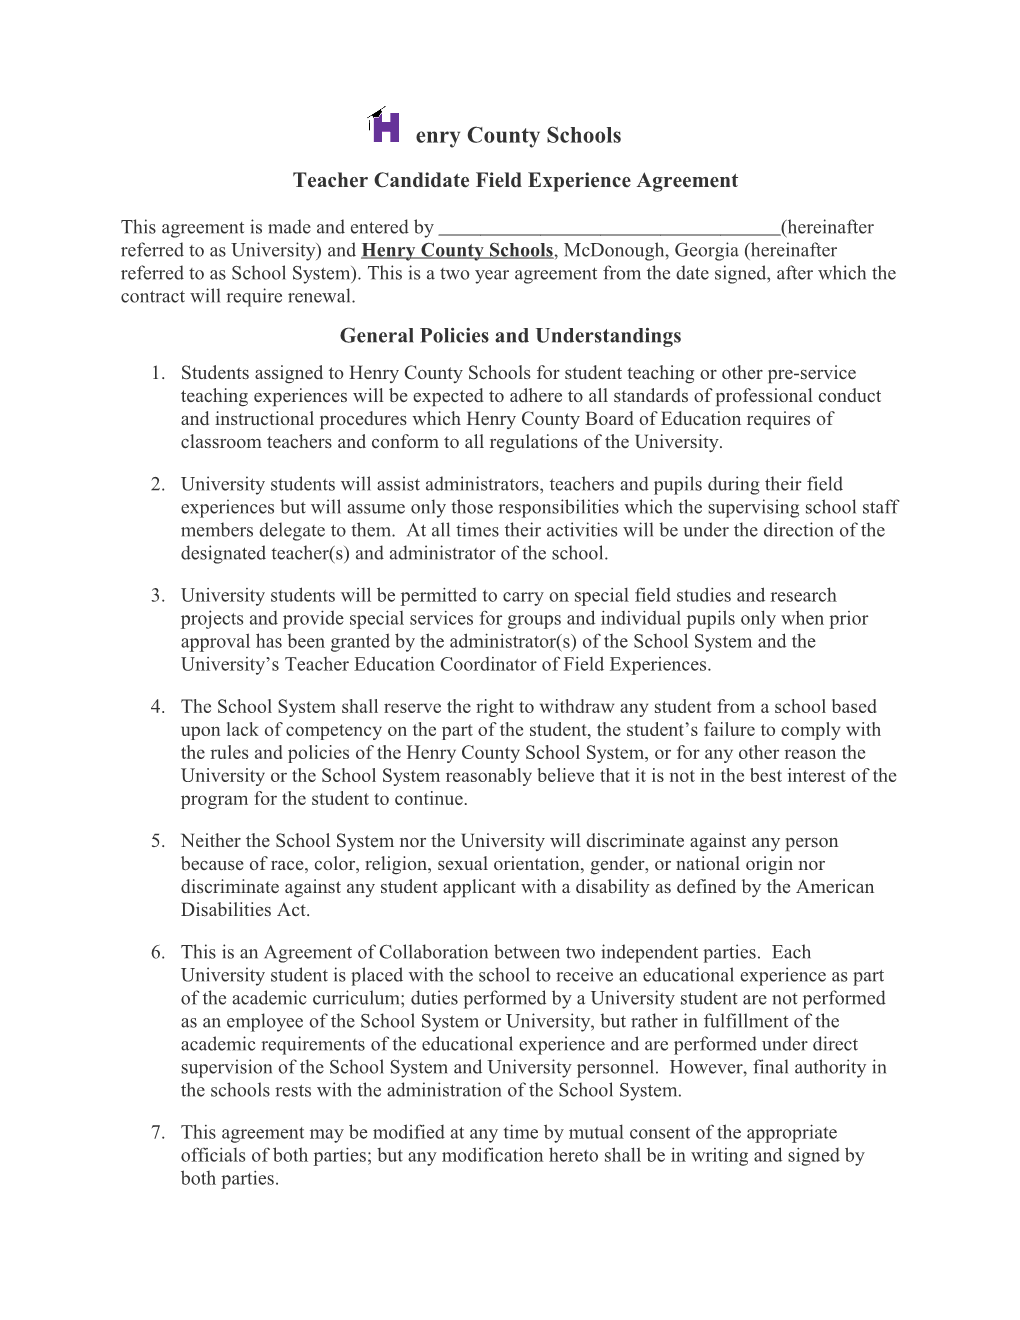 Henry County Schools Agreement for University Teacher Candidate Field Experiences